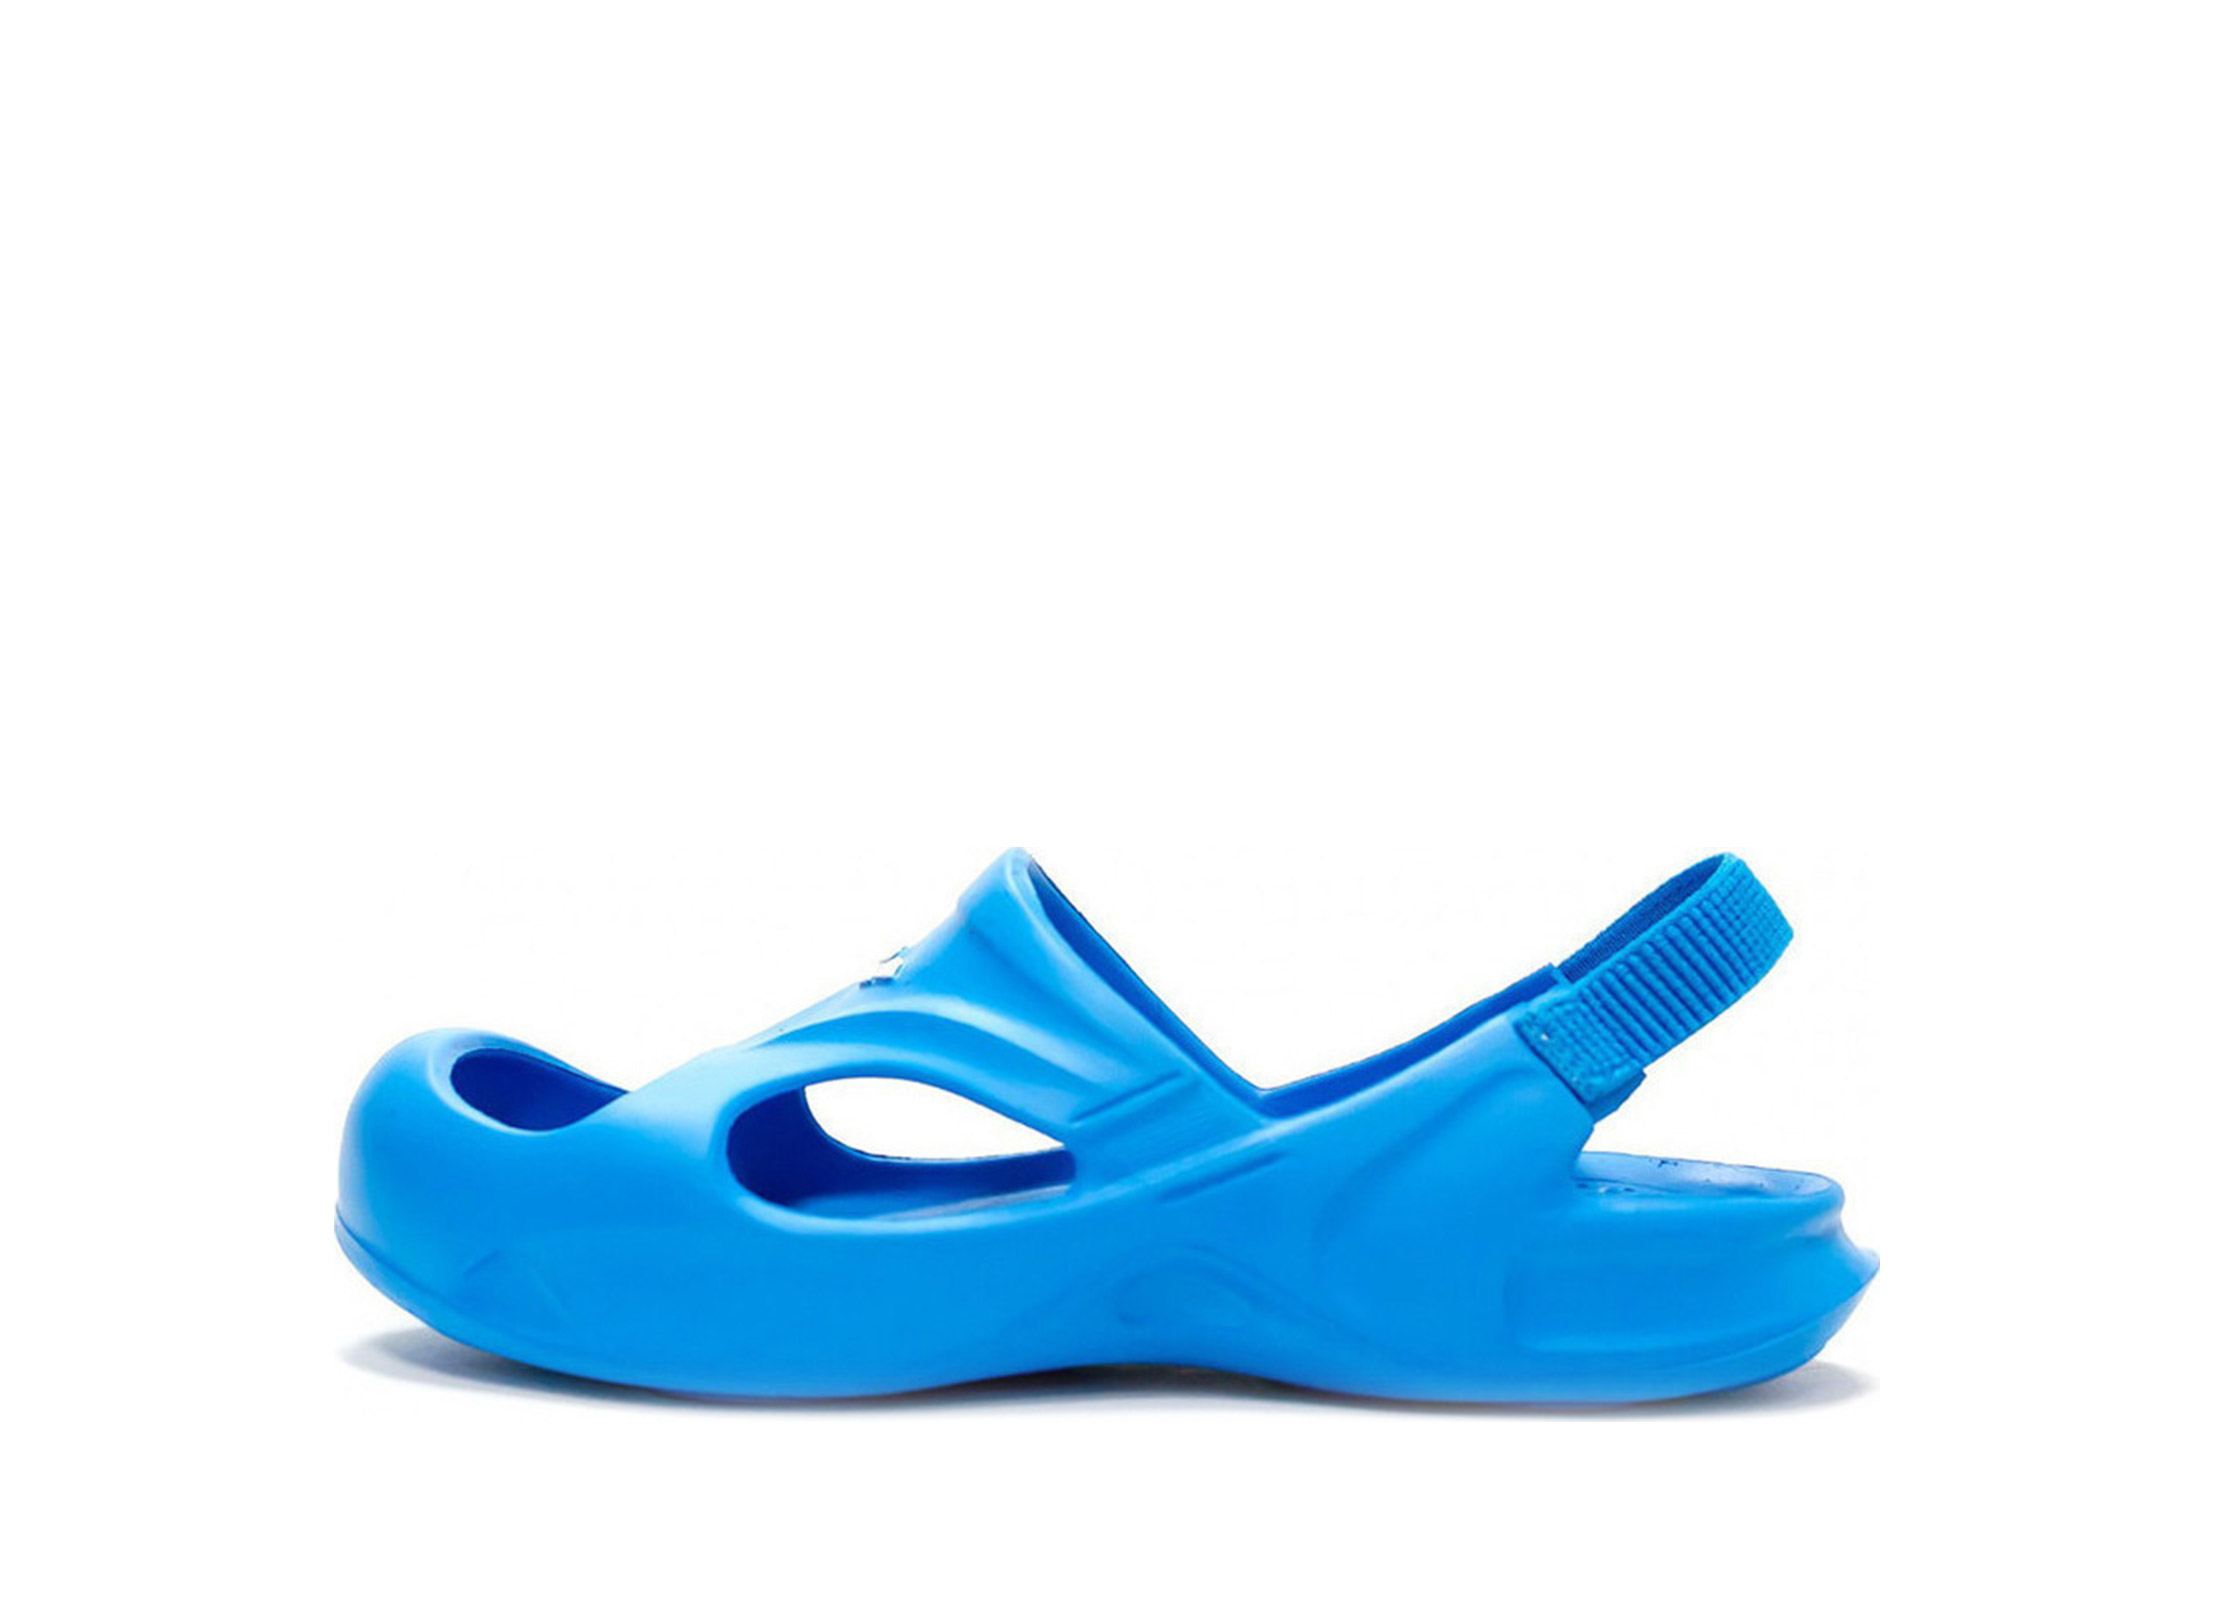 ARENA SOFTY KIDS HOOK 81270-077 Turquoise